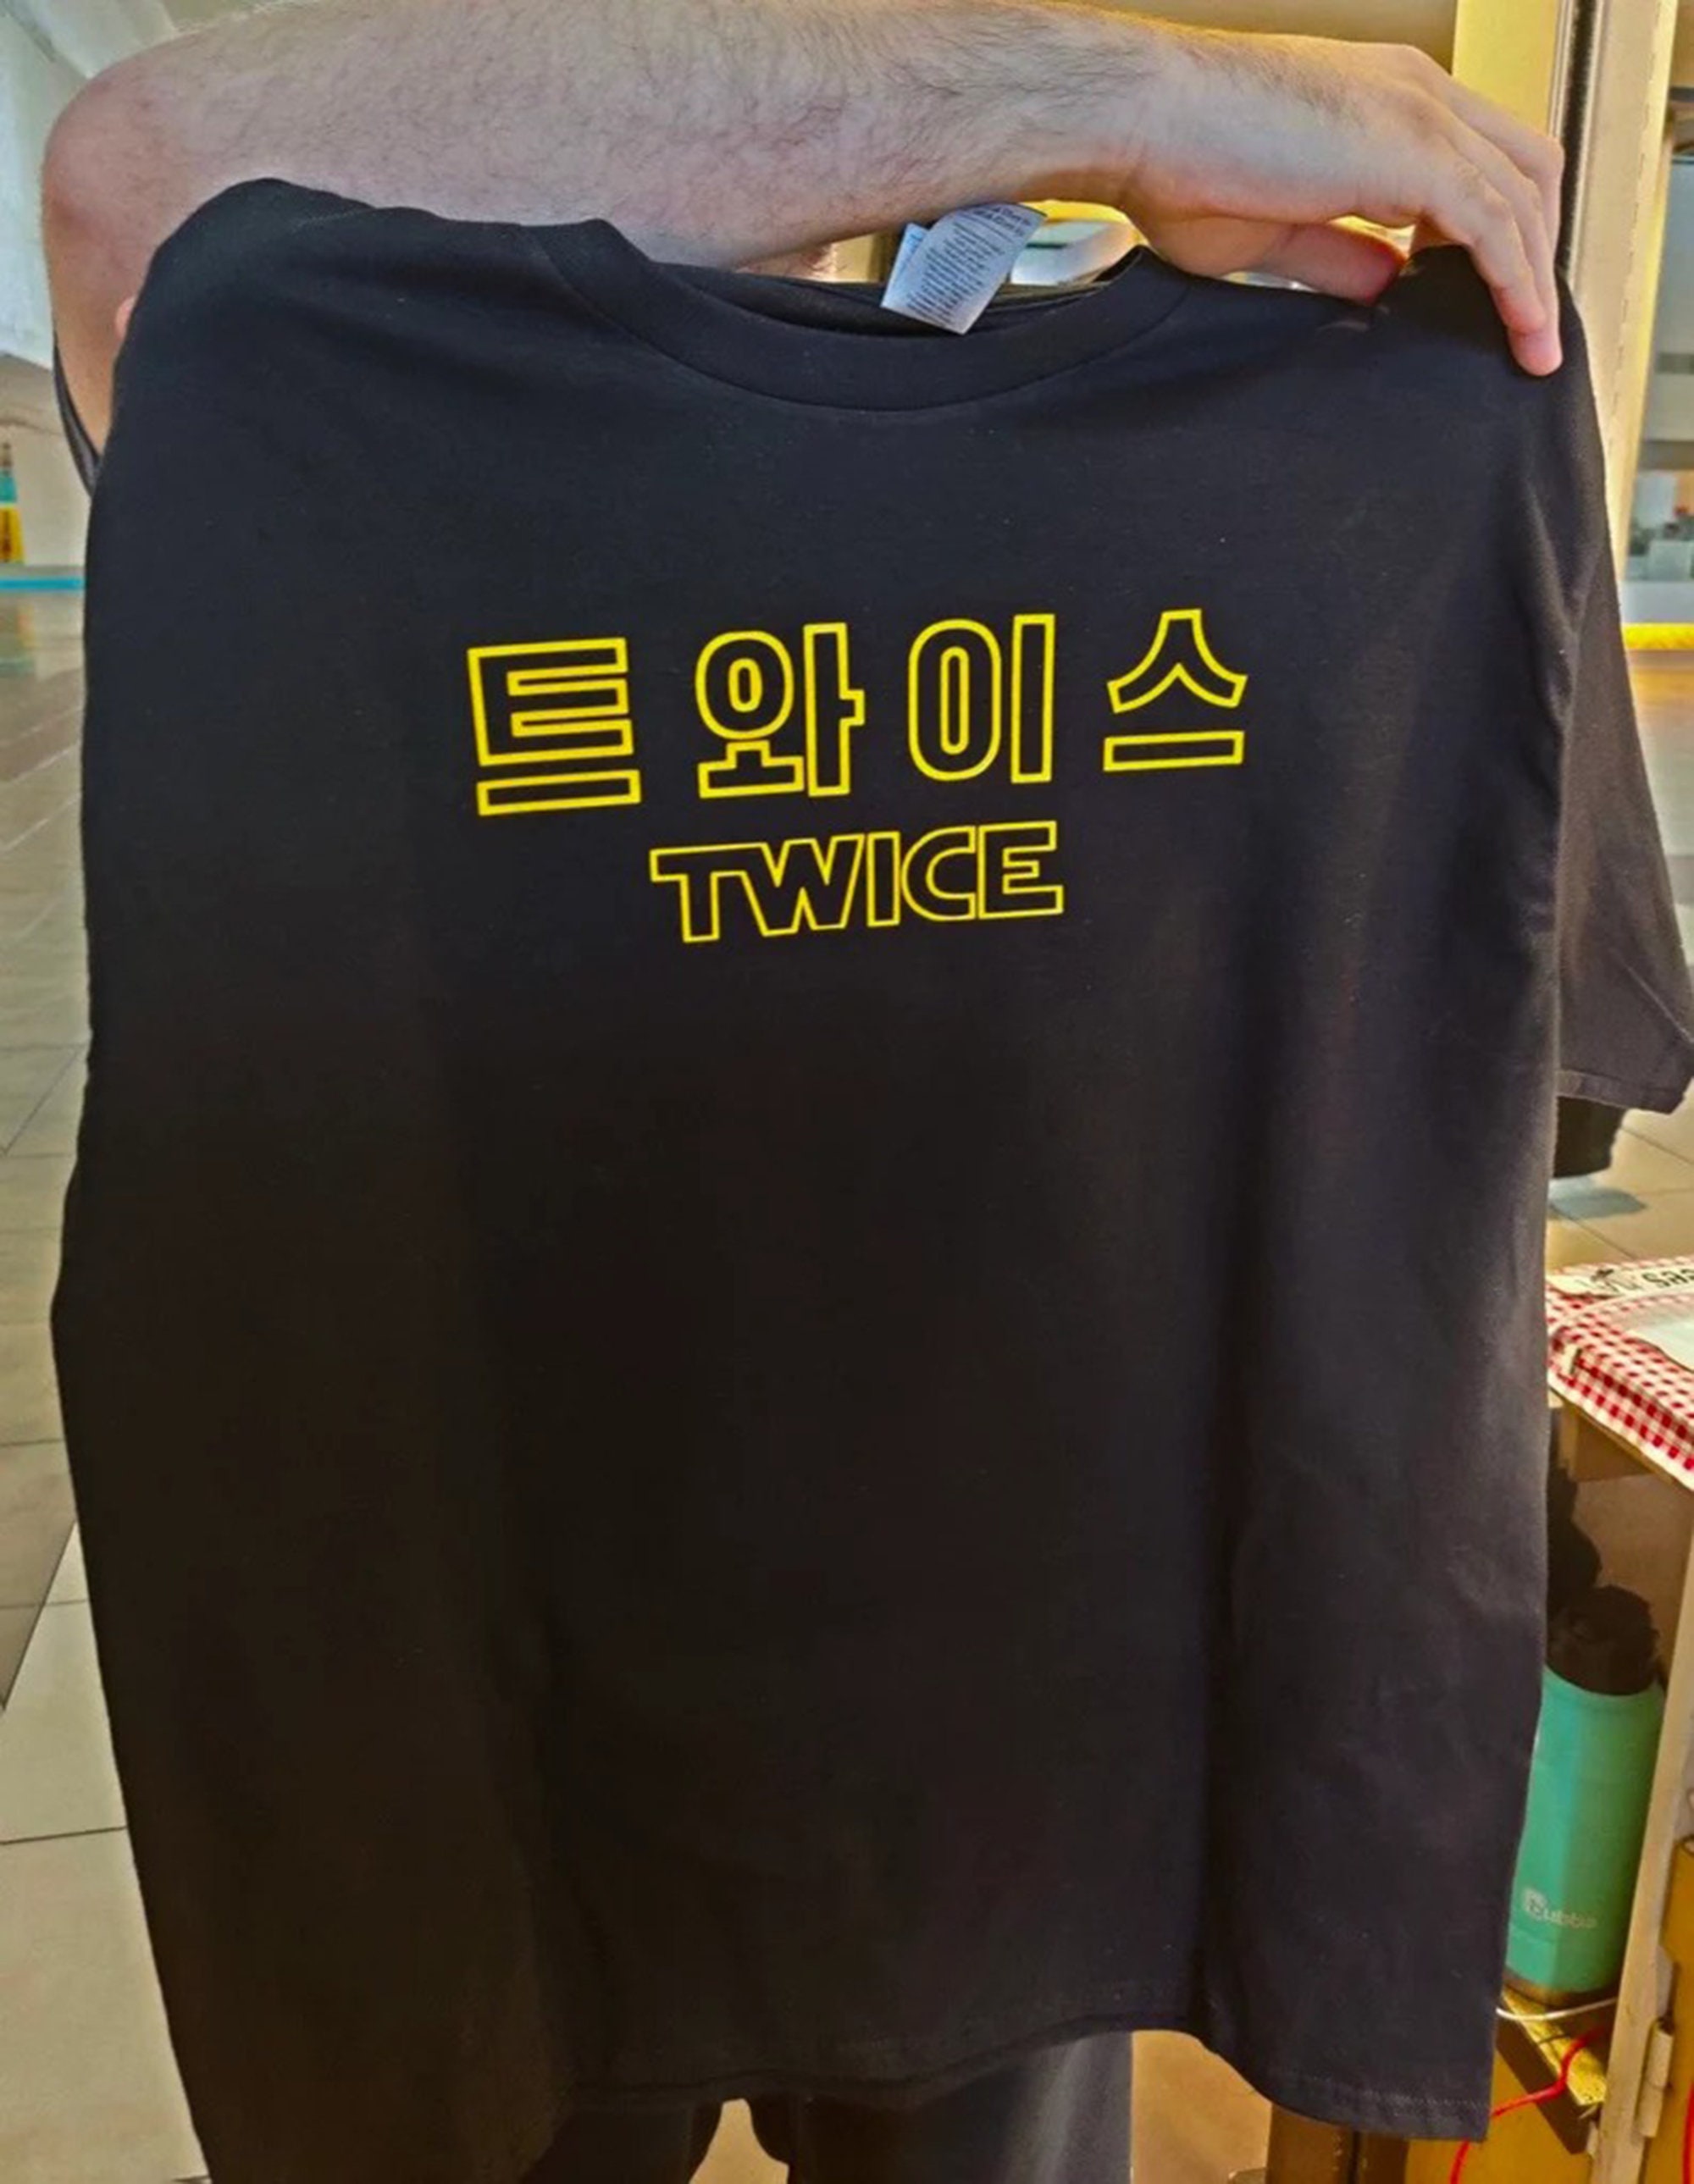 Kpop Fans Twice Double Sided Twice 4th World Tour Iii Concert Unisex T-Shirt